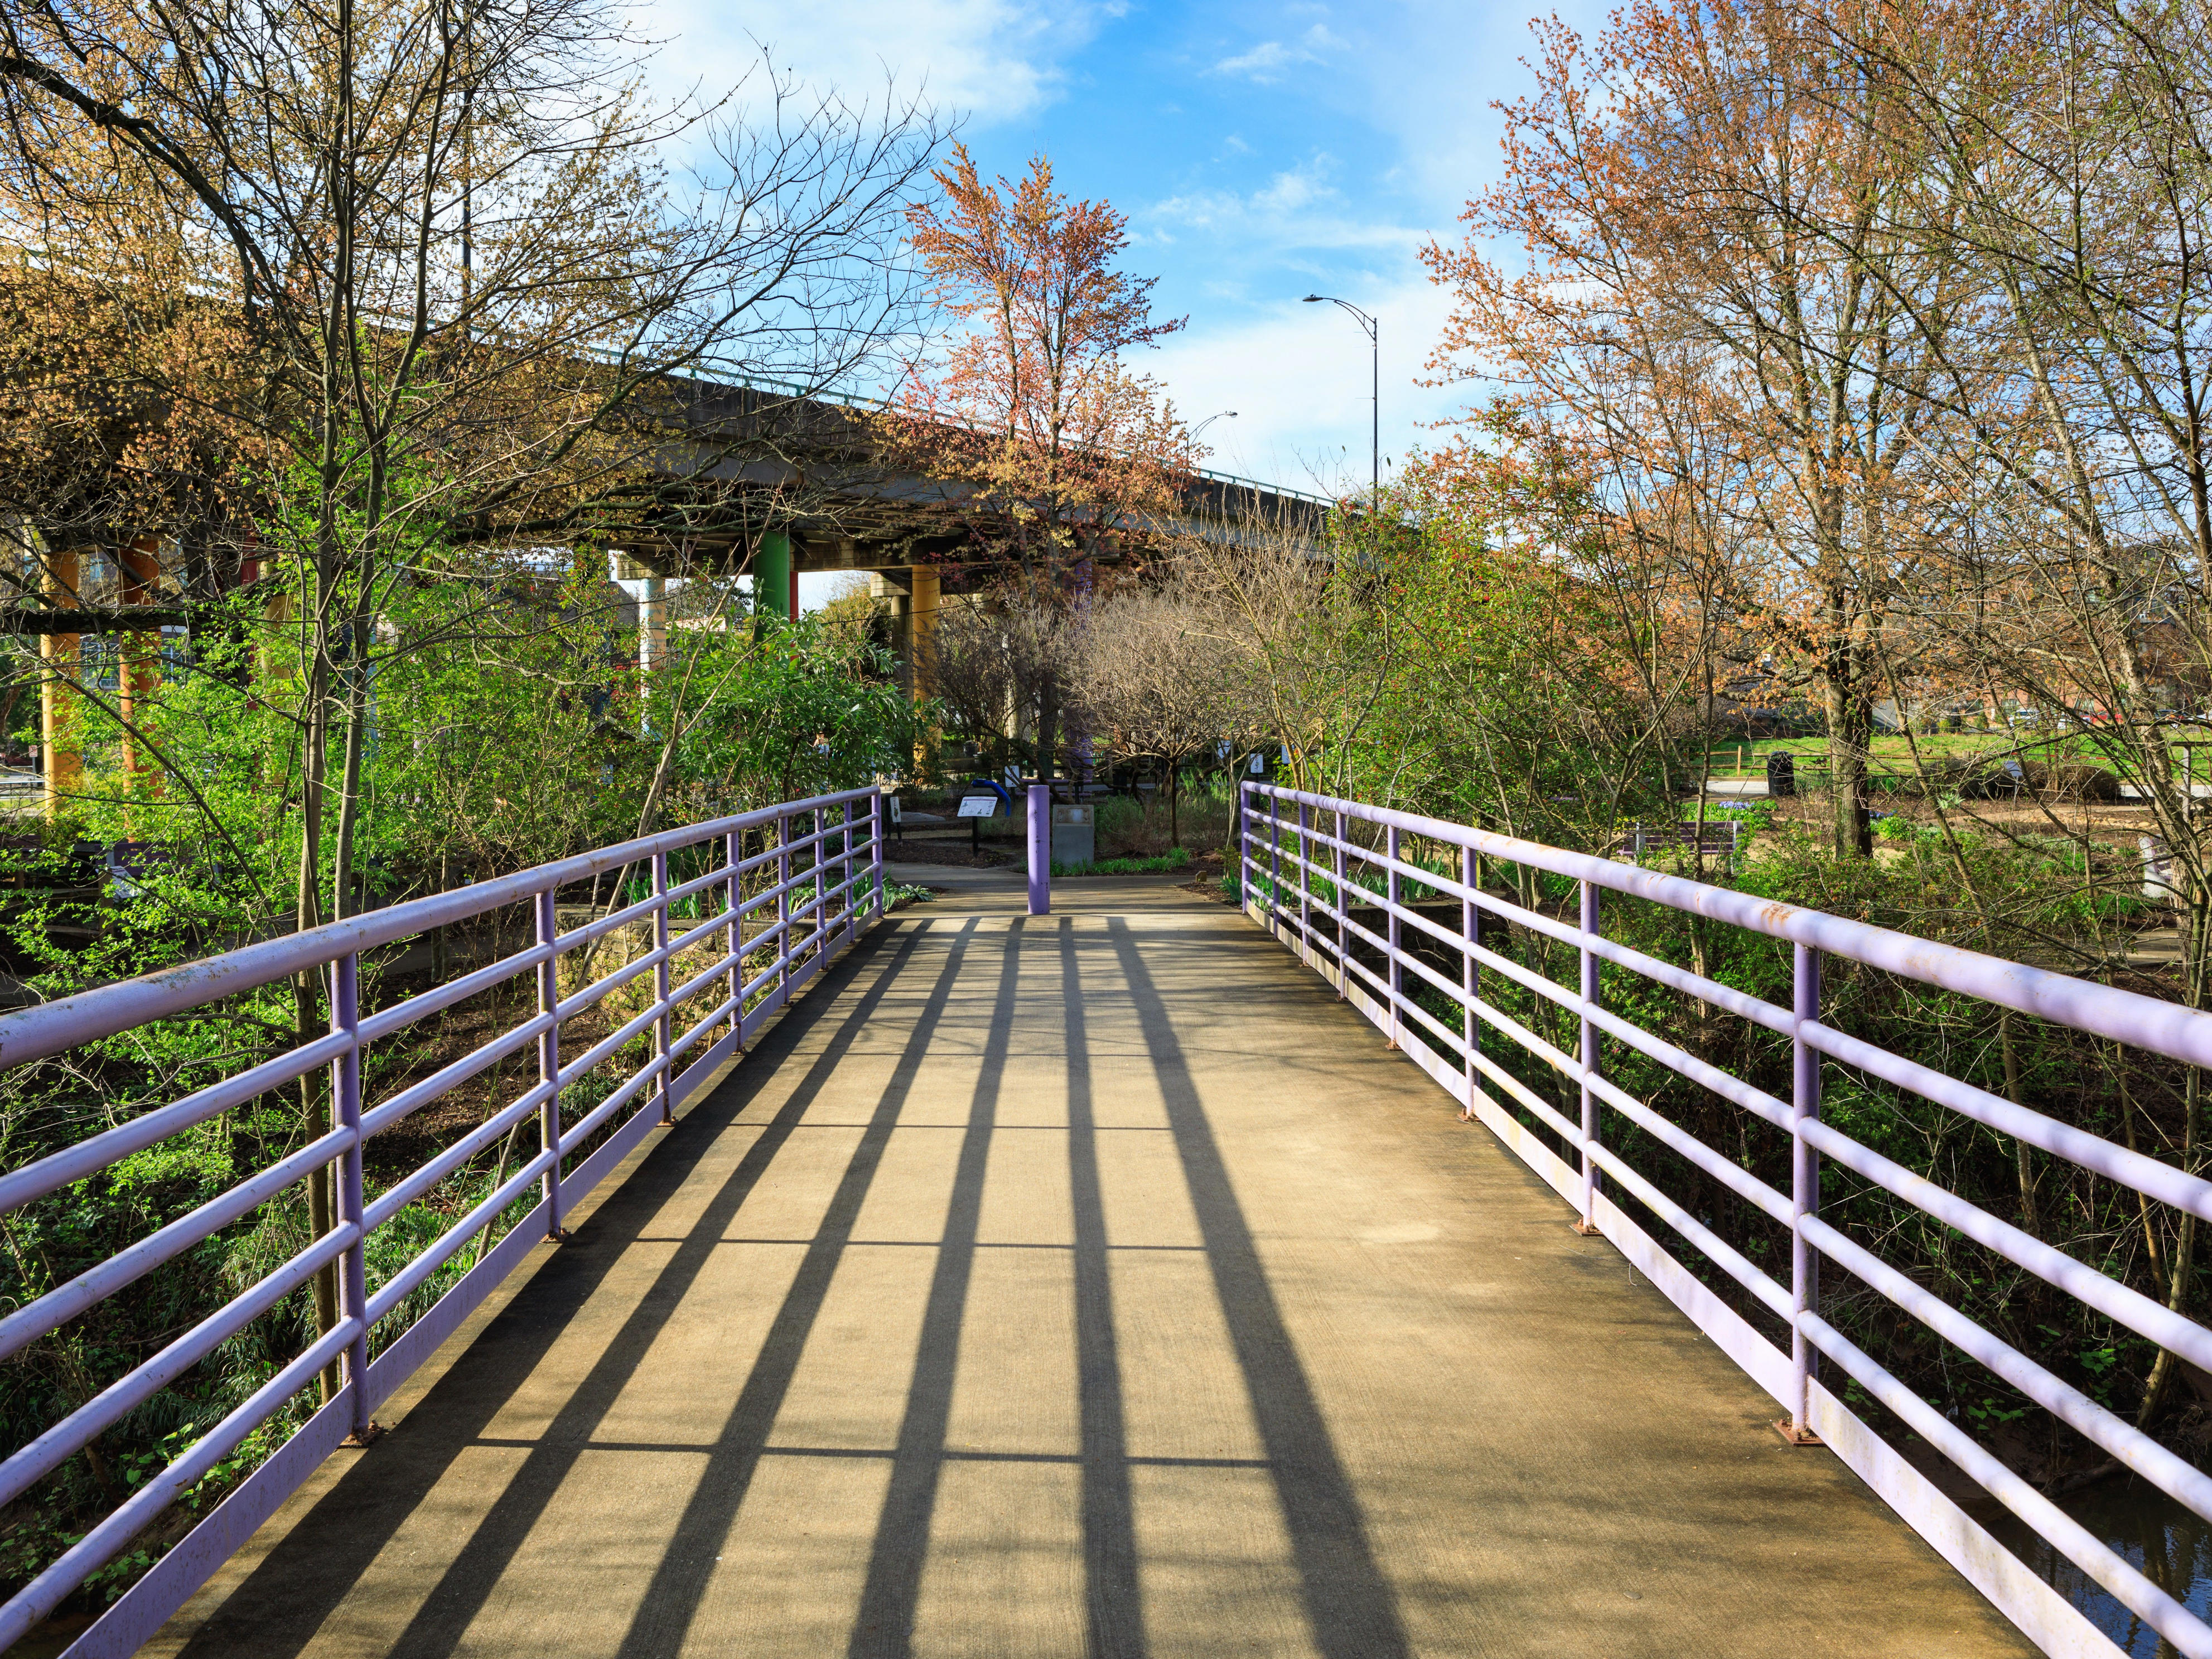 <p>This <a href="https://www.greenvillesc.gov/316/Swamp-Rabbit-Trail-Interactive-Map">22-mile mixed-use trail</a> runs right through downtown Greenville, so you get the best of both worlds: nature at its finest and a charming southern city.</p><p>One of the stars of the trail is an iconic beech tree with exposed roots and a canopy that towers 100 feet in the air. The trail also leads to <a href="https://www.greenvillesc.gov/167/Falls-Park">Falls Park on the Reedy</a>, an urban park with a suspension bridge where you can get unobstructed views of the Reedy River waterfalls.</p>